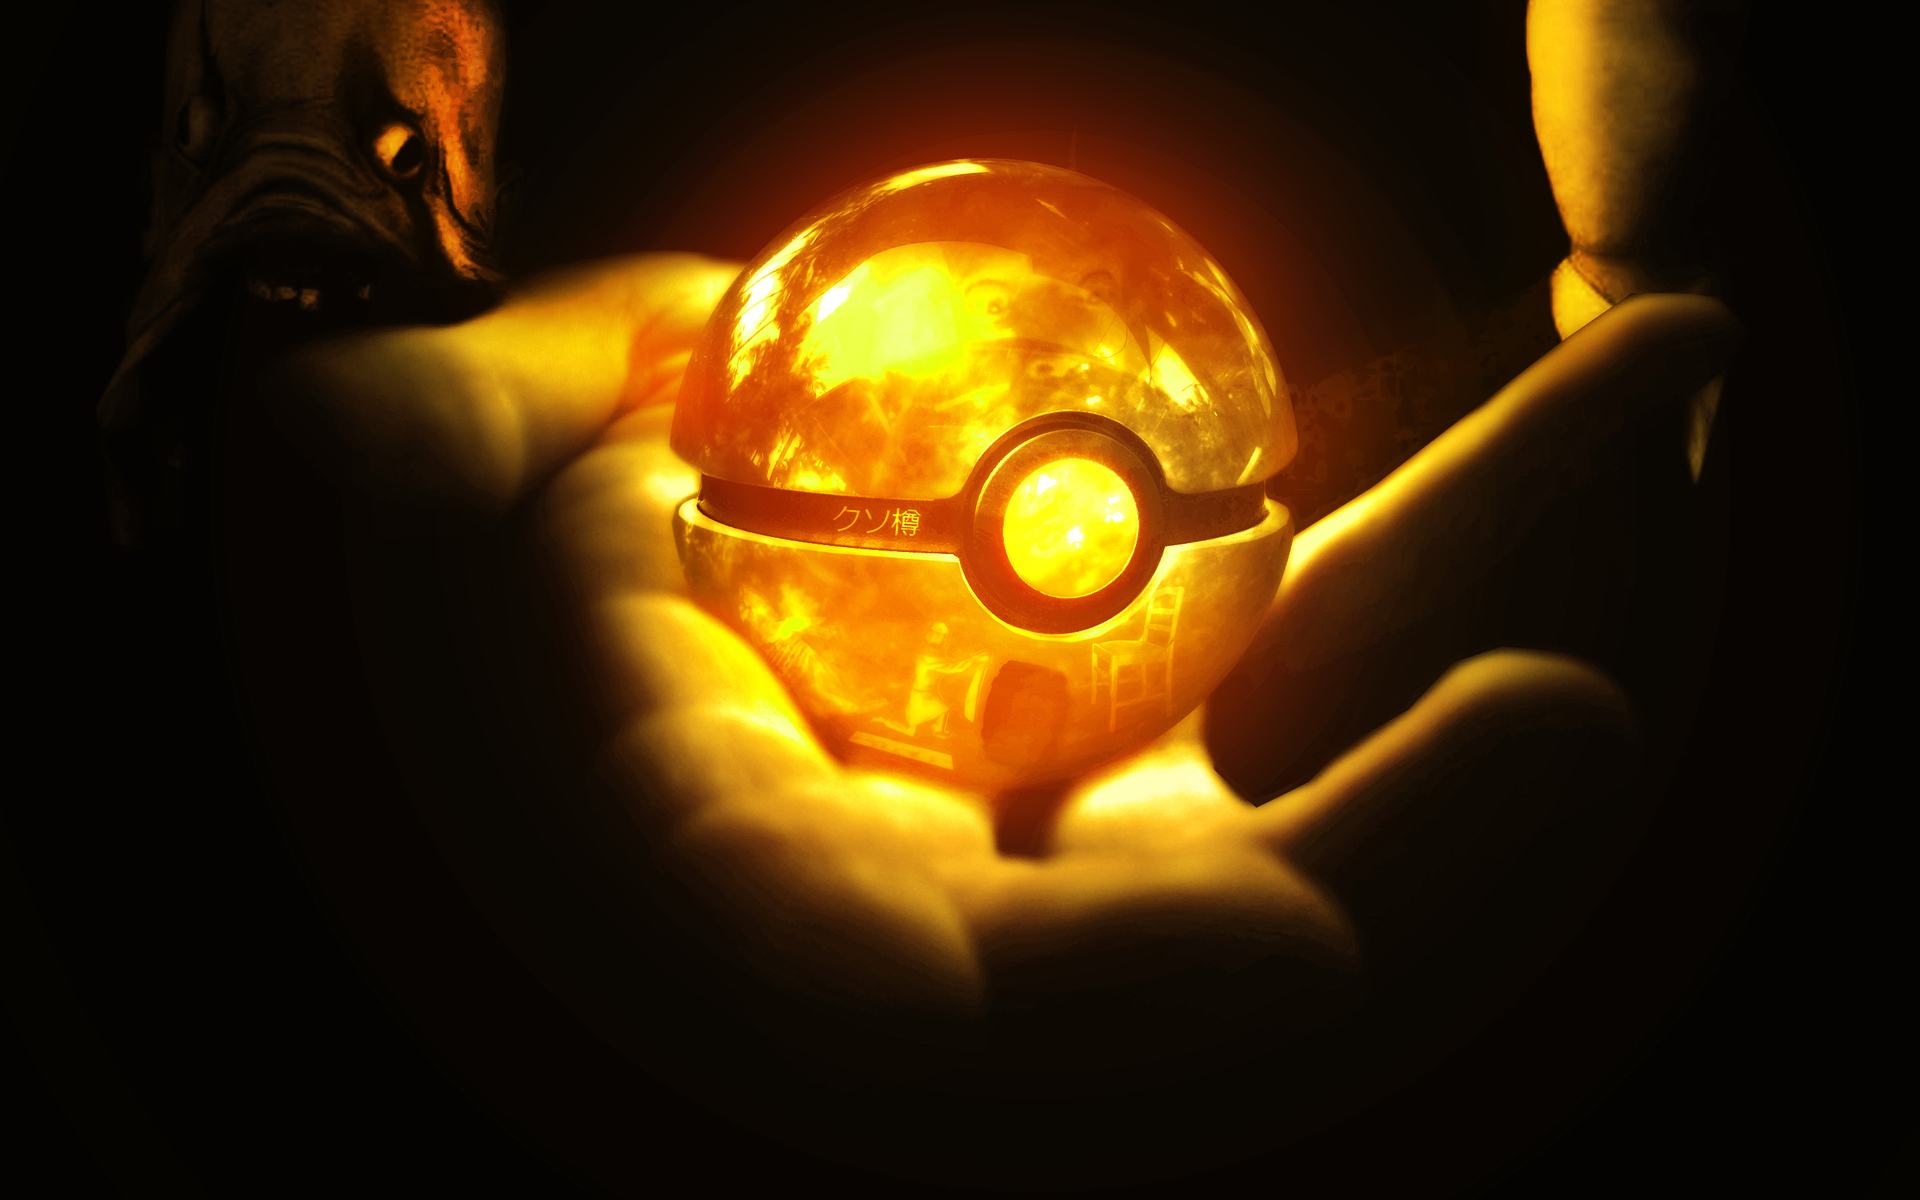 anime, Spheres, Pokemon, Globes, Bright, Lights, People, Hands, Glowing, Fantasy Wallpaper